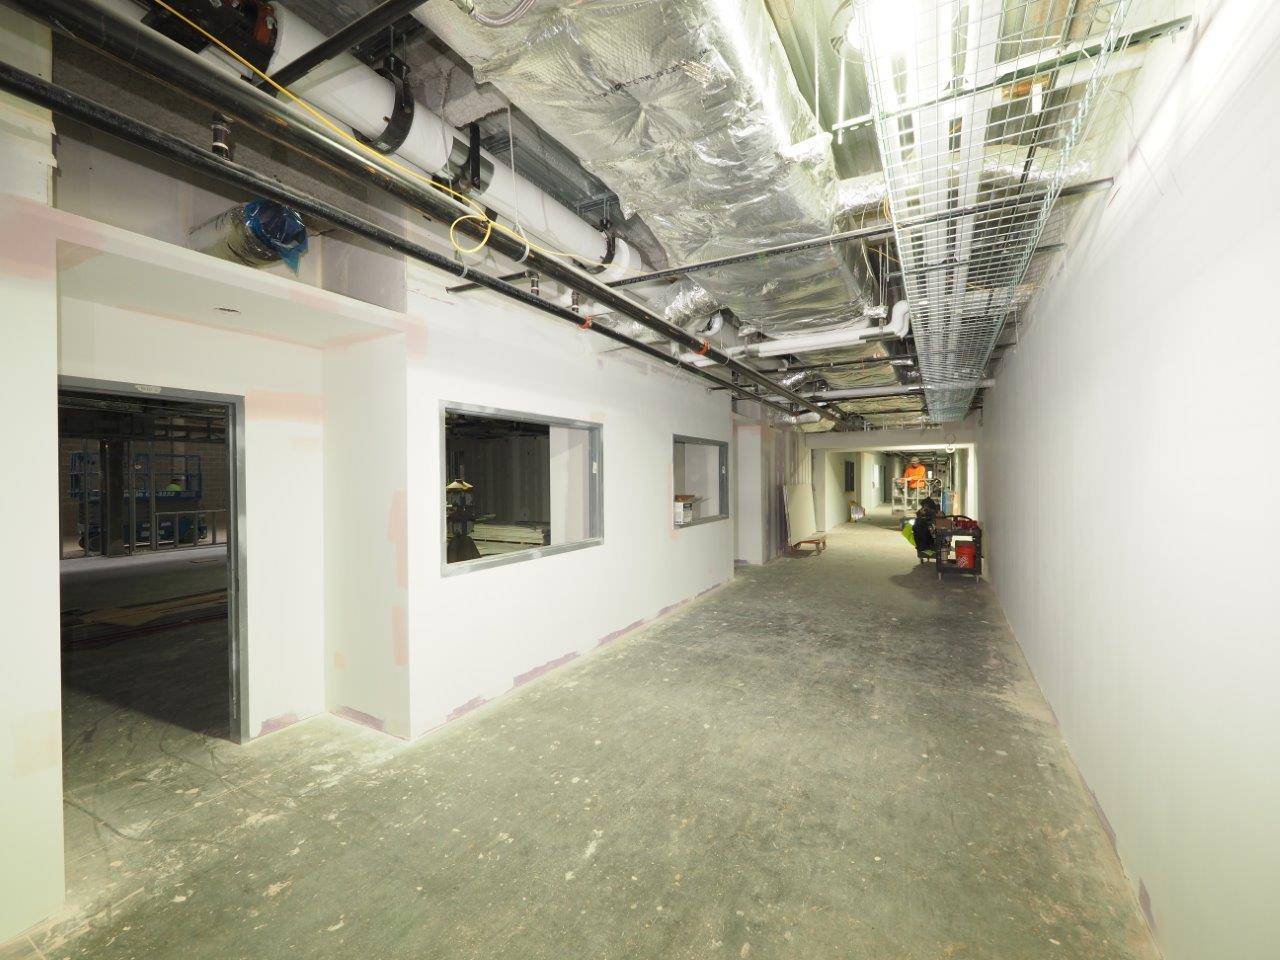 Drywall and painting work inside the new high school